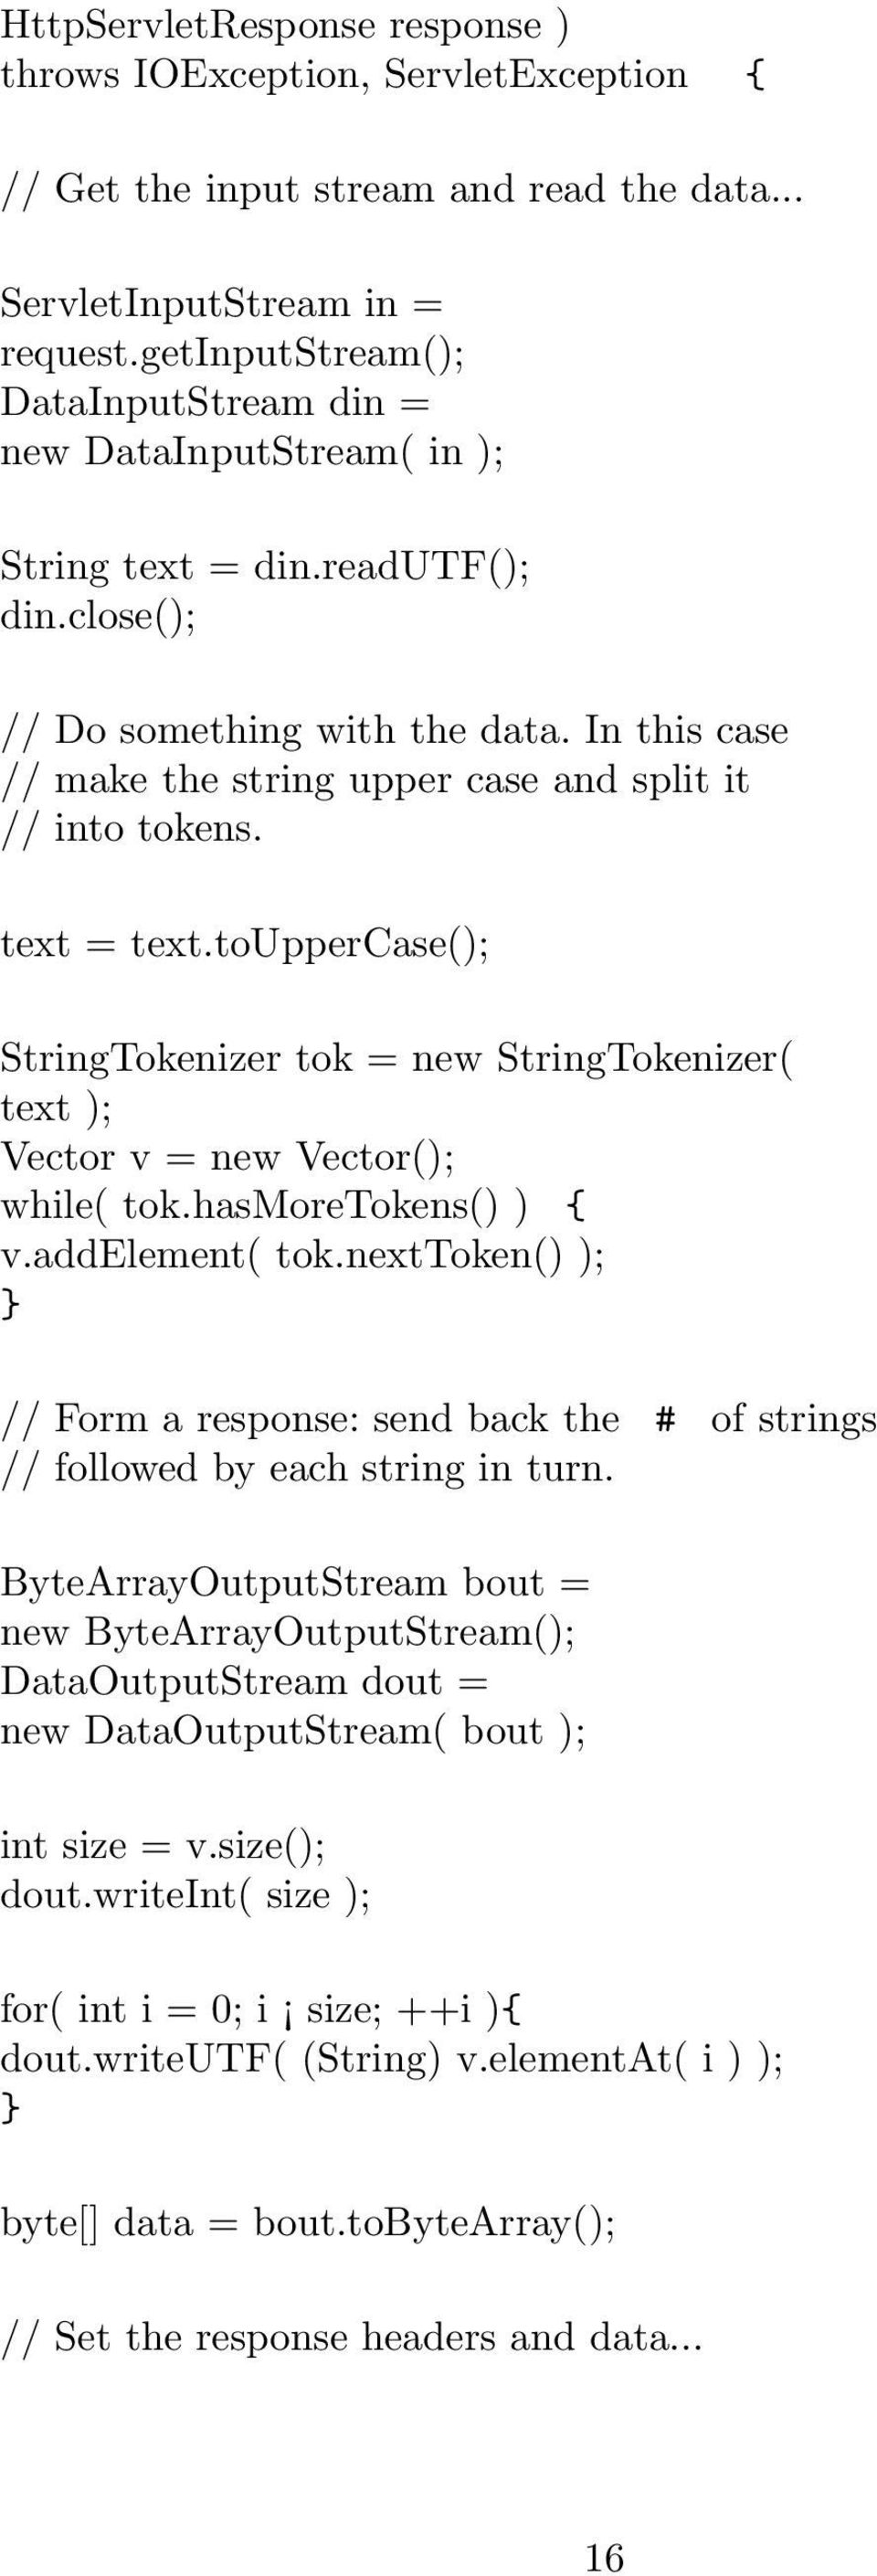 In this case // make the string upper case and split it // into tokens. text = text.touppercase(); StringTokenizer tok = new StringTokenizer( text ); Vector v = new Vector(); while( tok.